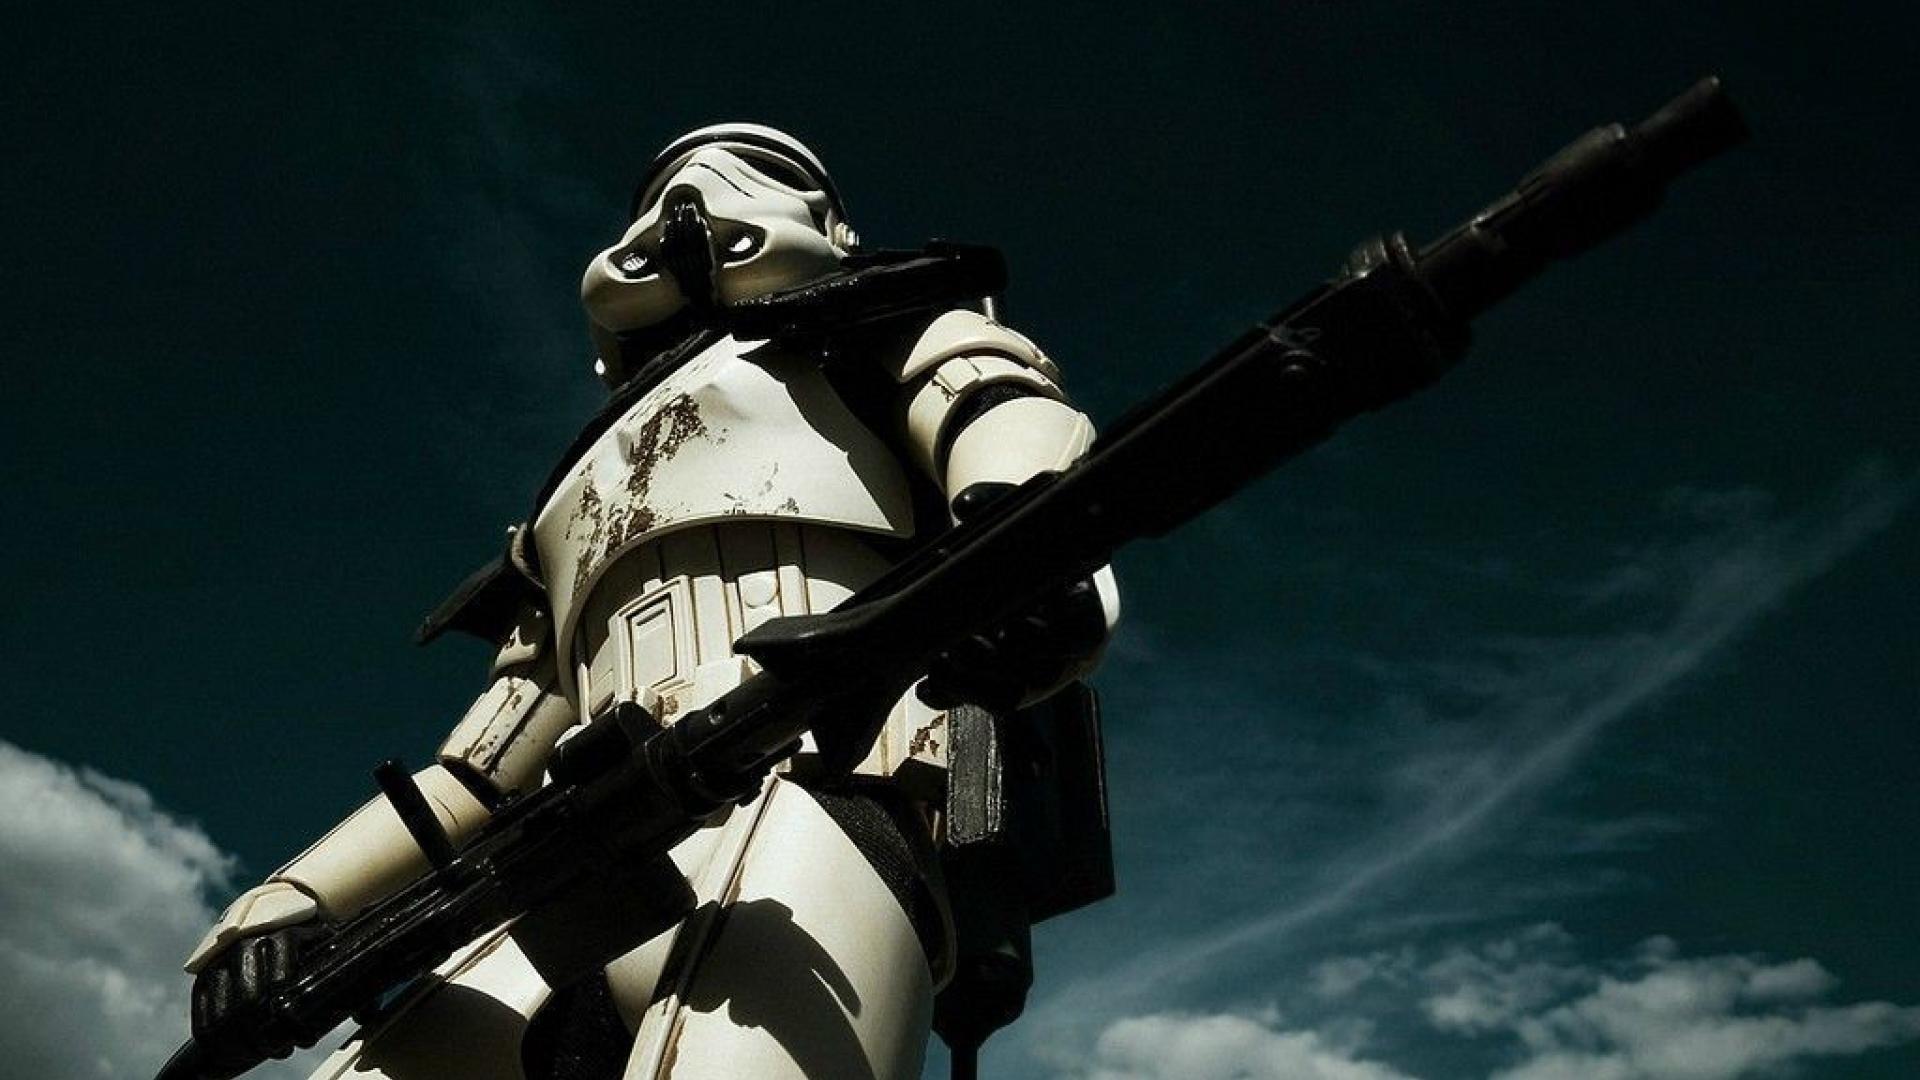 Star Wars Stormtrooper Army Wallpaper Picture to